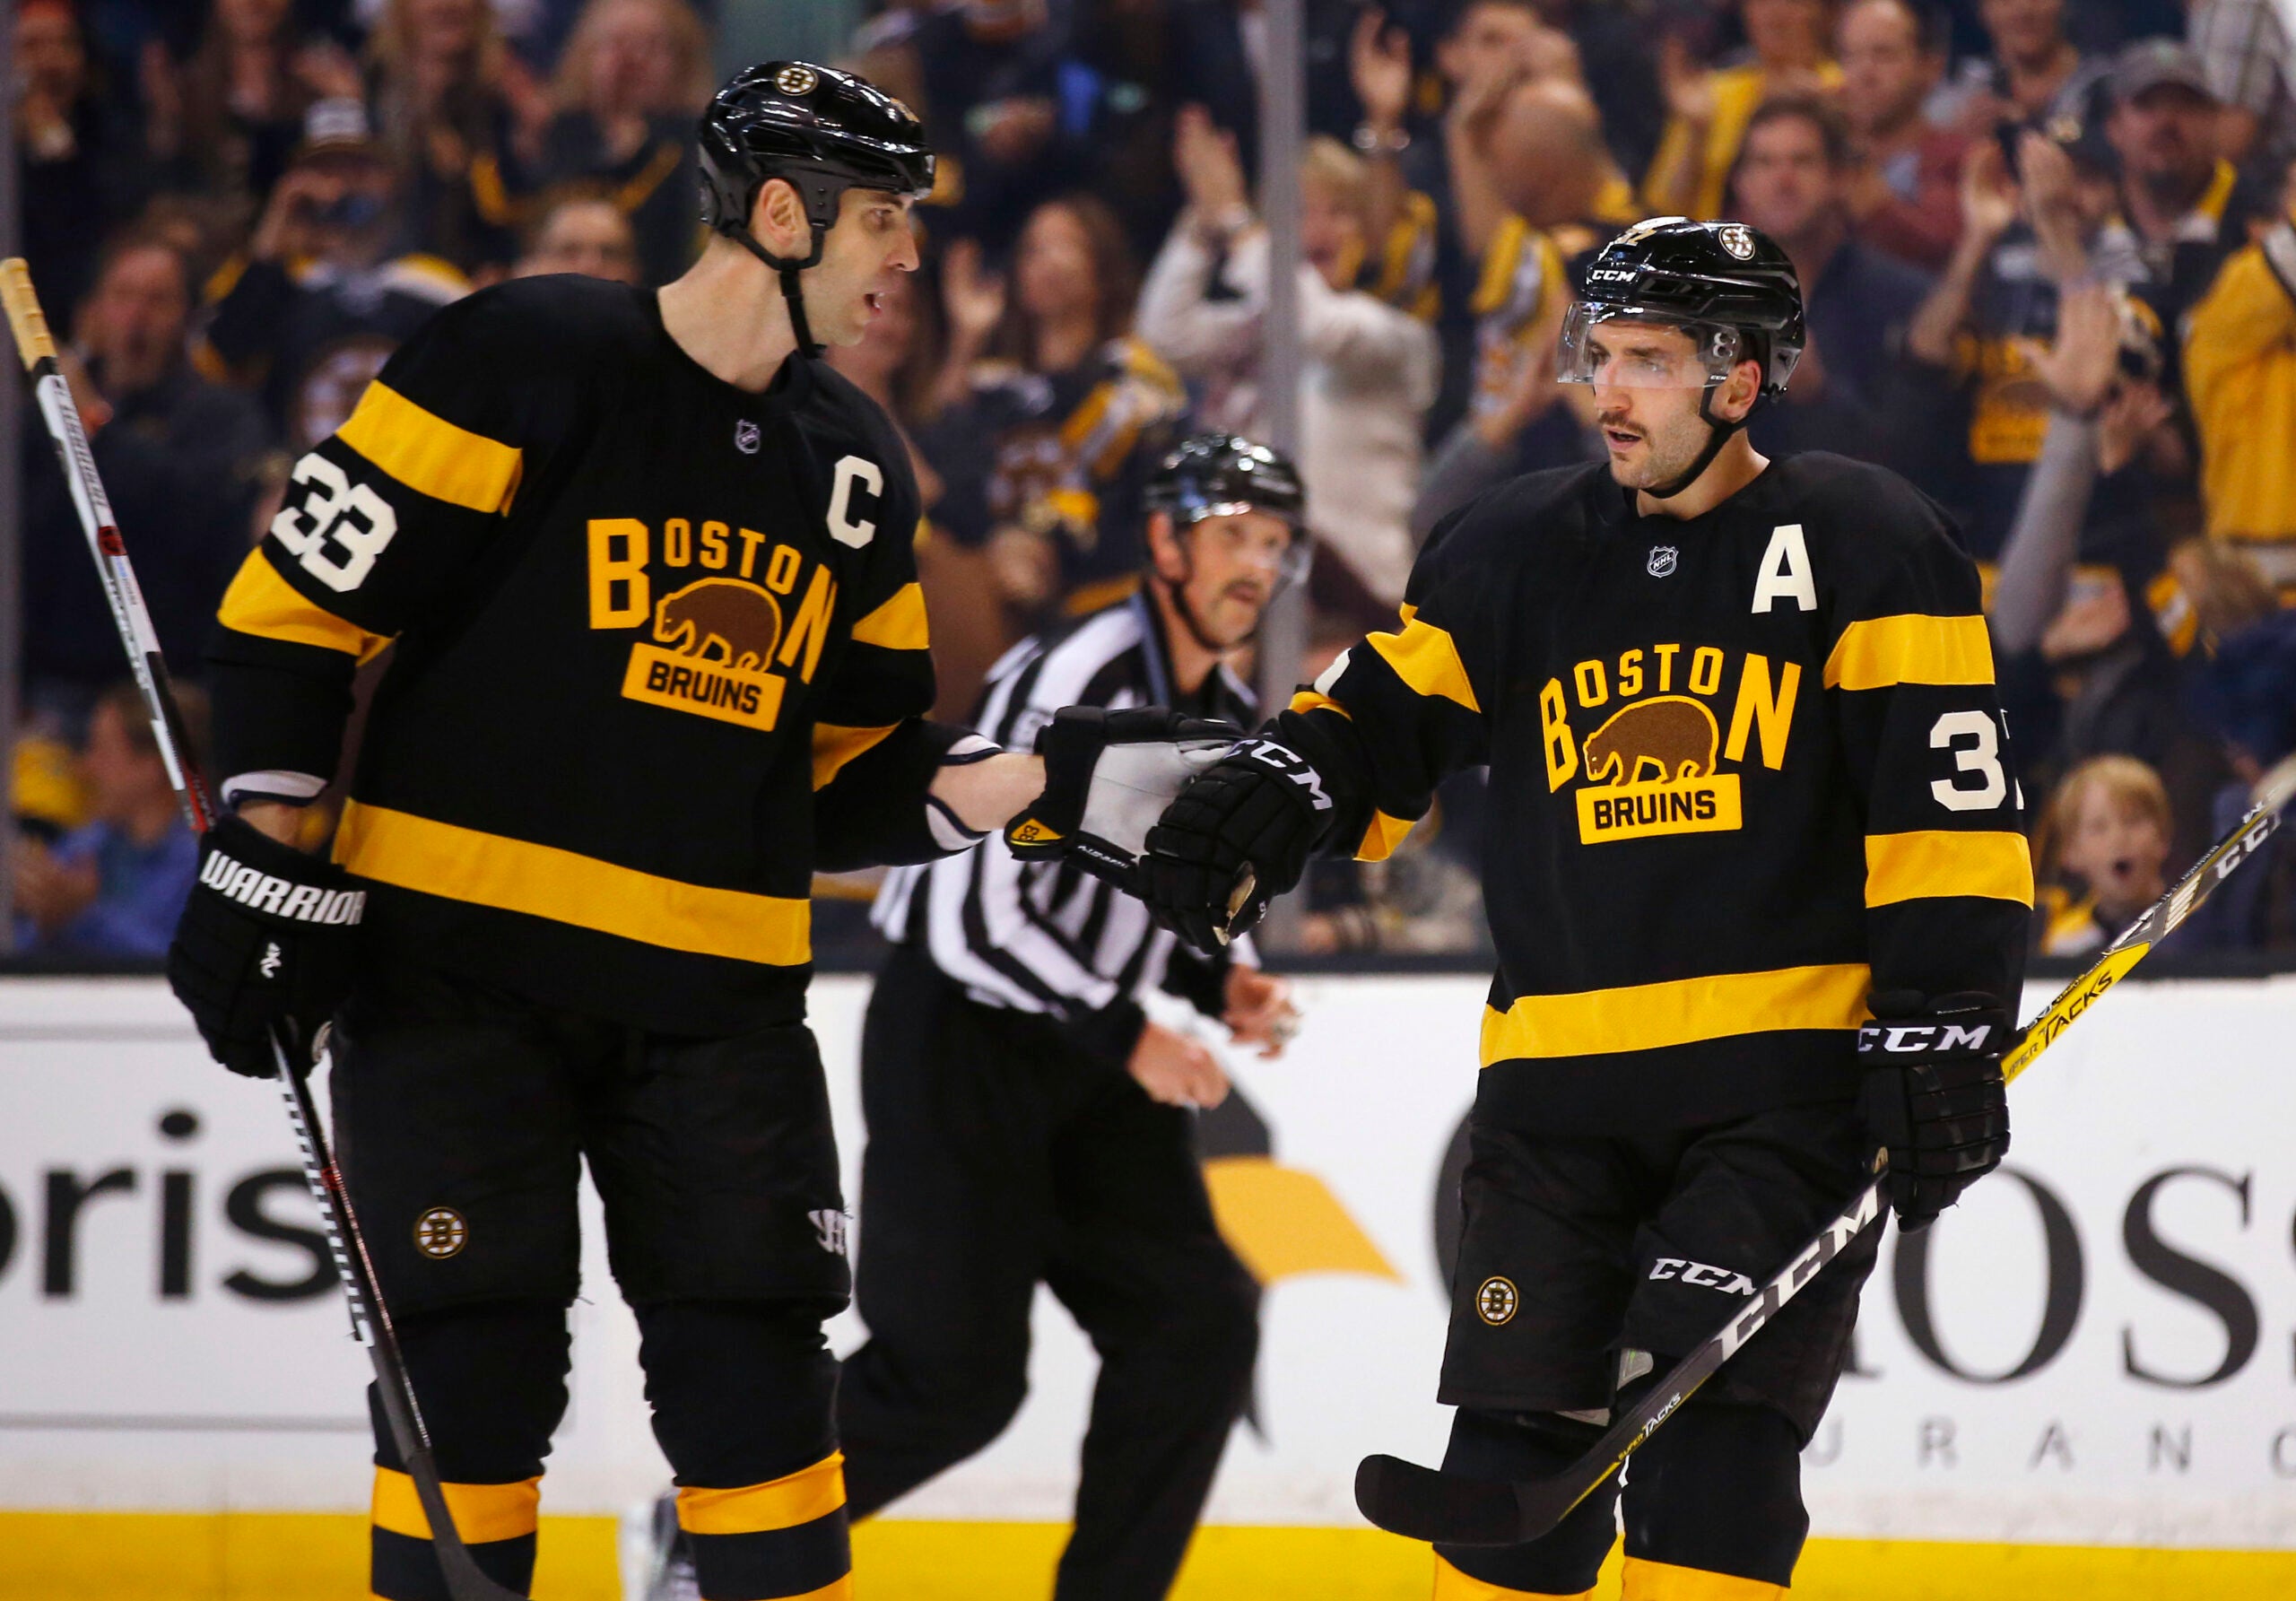 Boston Bruins' Patrice Bergeron is congratulated, after his goal, by defenseman Zdeno Chara (33) during the second period of an NHL hockey game against the Winnipeg Jets in Boston on Saturday, Nov. 19, 2016.